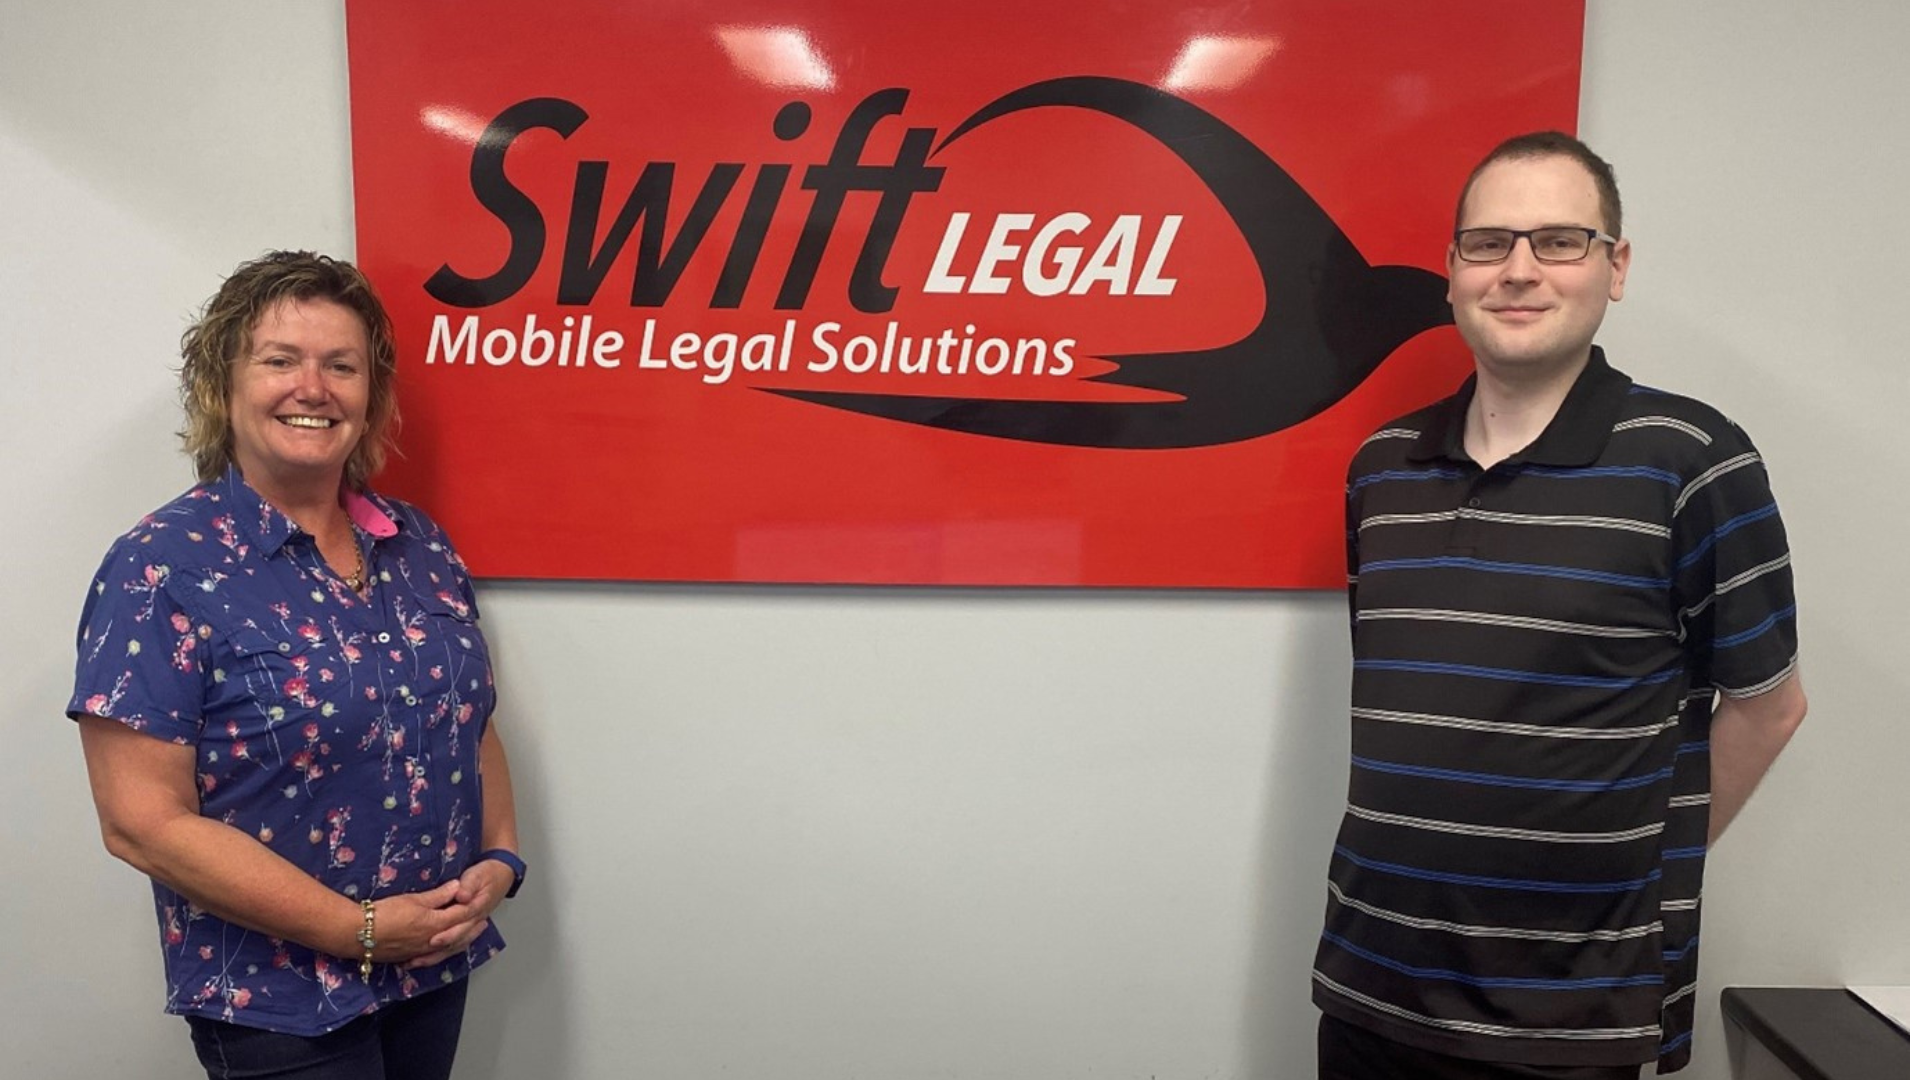 Chris standing next to his employer Judica, standing in front of a large red Swift Legal sign